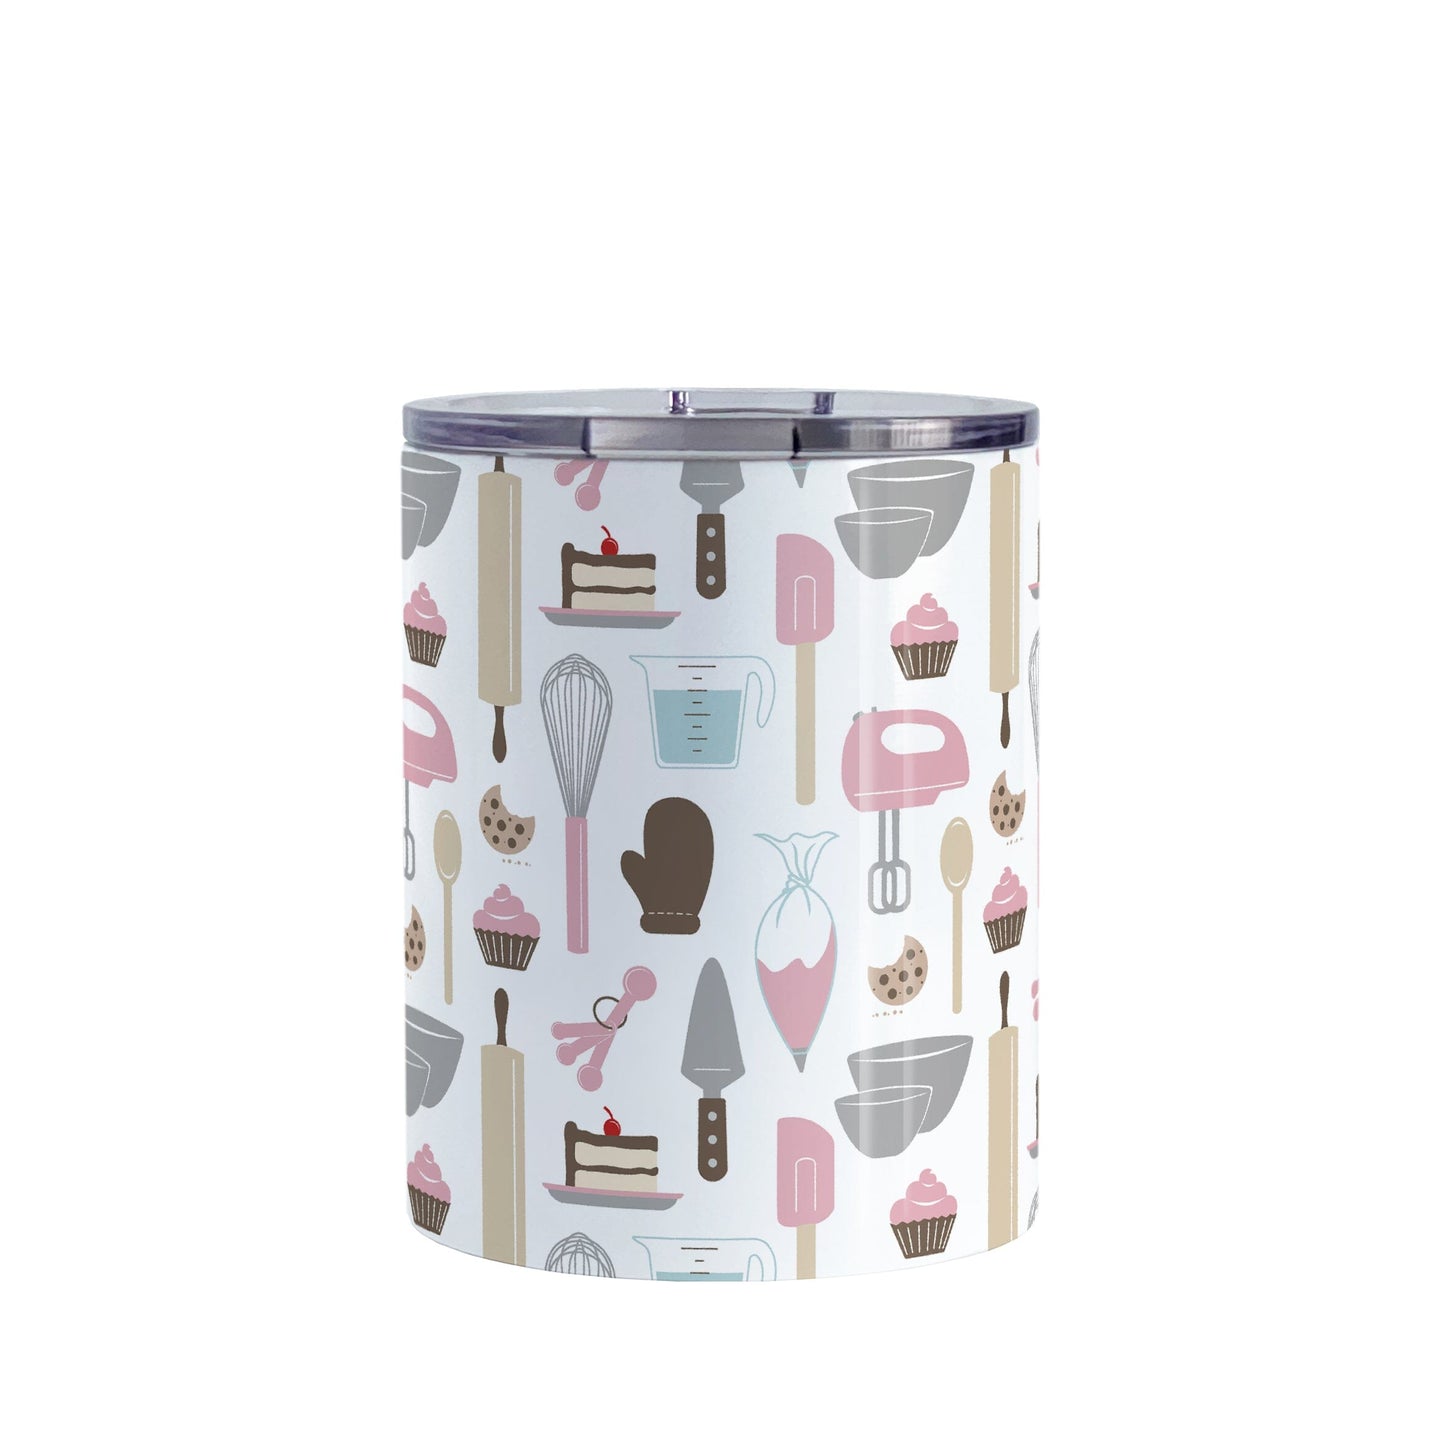 Pink Baking Pattern Tumbler Cup (10oz) at Amy's Coffee Mugs. A stainless steel tumbler cup designed with a pattern of baking tools like spatulas, whisks, mixers, bowls, and spoons, with cookies, cupcakes, and cake all in a pink, gray, brown, and beige color scheme that wraps around the cup. 